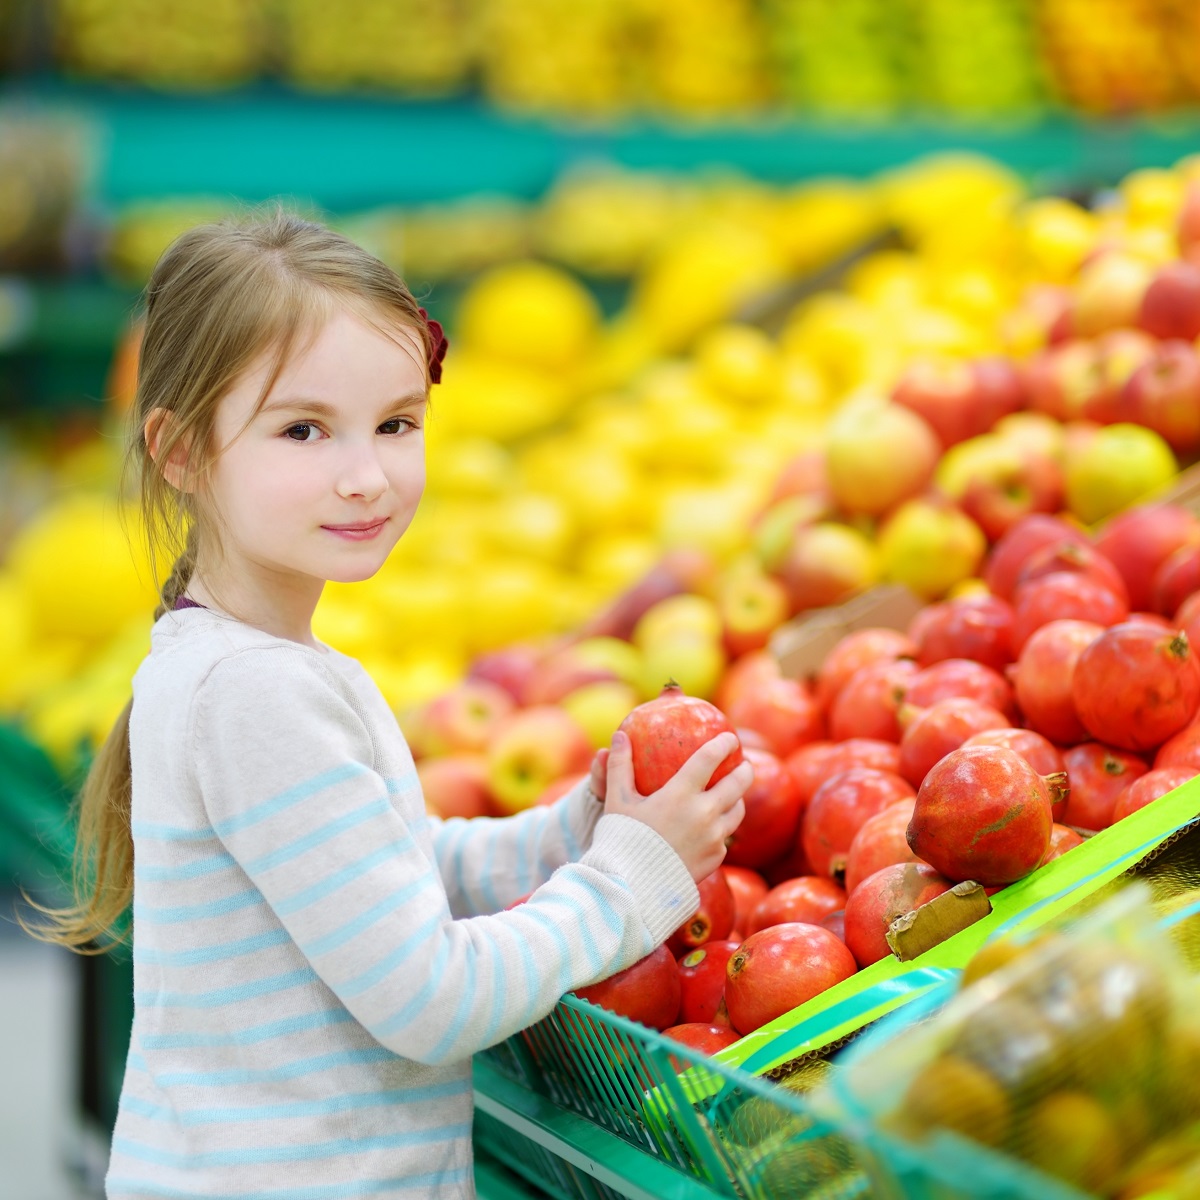 Little girl choosing pomegranate in a food store